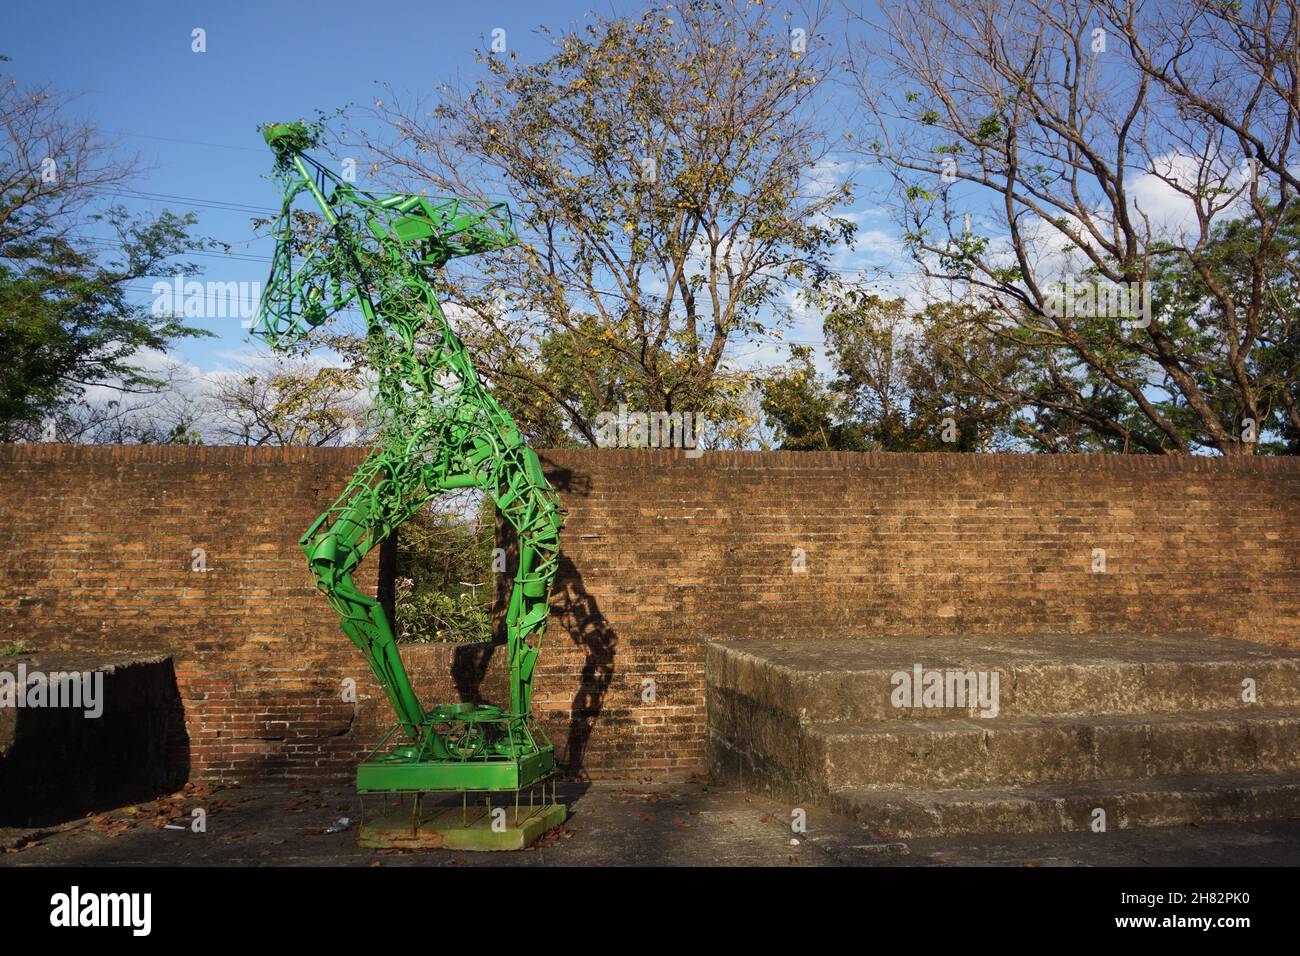 MANILA, PHILIPPINES - Mar 16, 2019: A public art installation in the walled city of Intramuros, Manila, Philippines Stock Photo